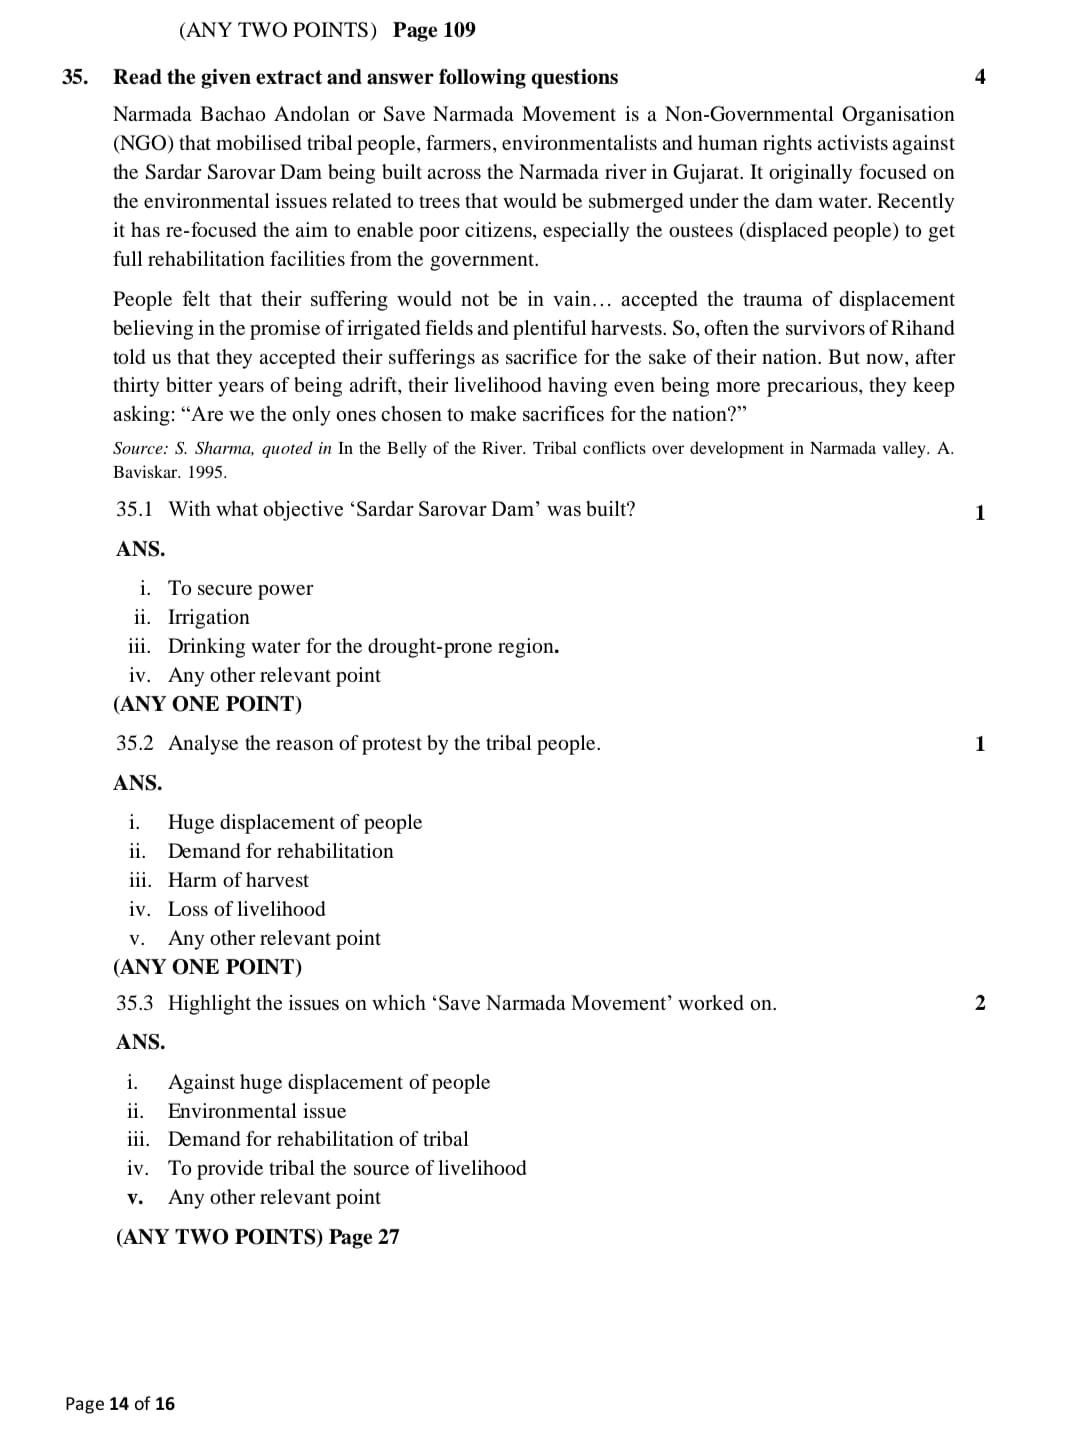 cbse class 10 social science official sample question paper14